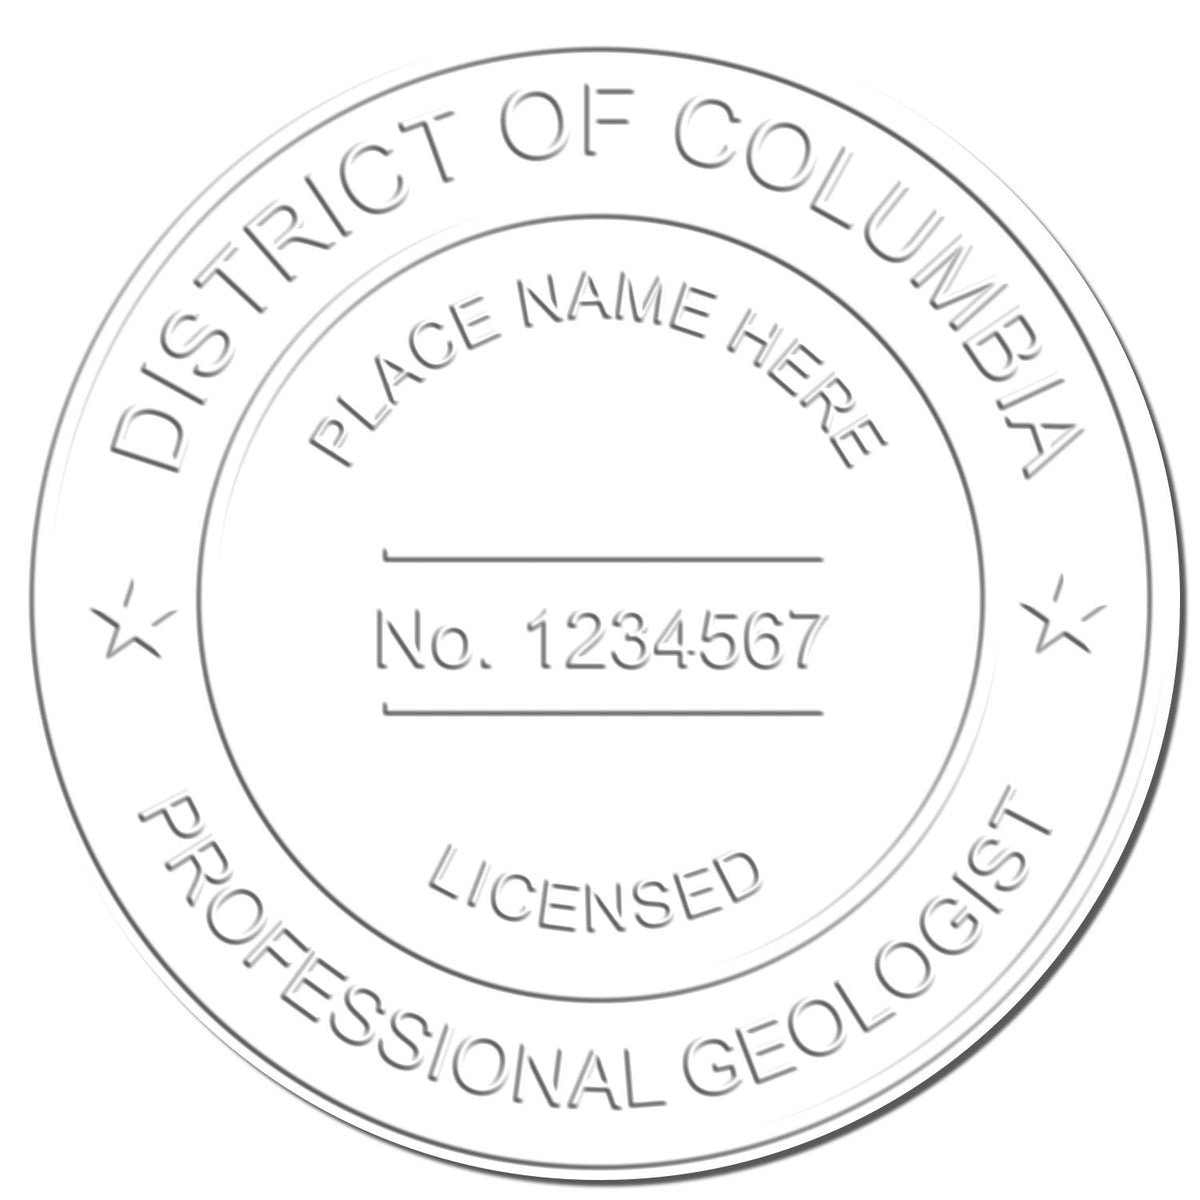 The District of Columbia Geologist Desk Seal stamp impression comes to life with a crisp, detailed image stamped on paper - showcasing true professional quality.